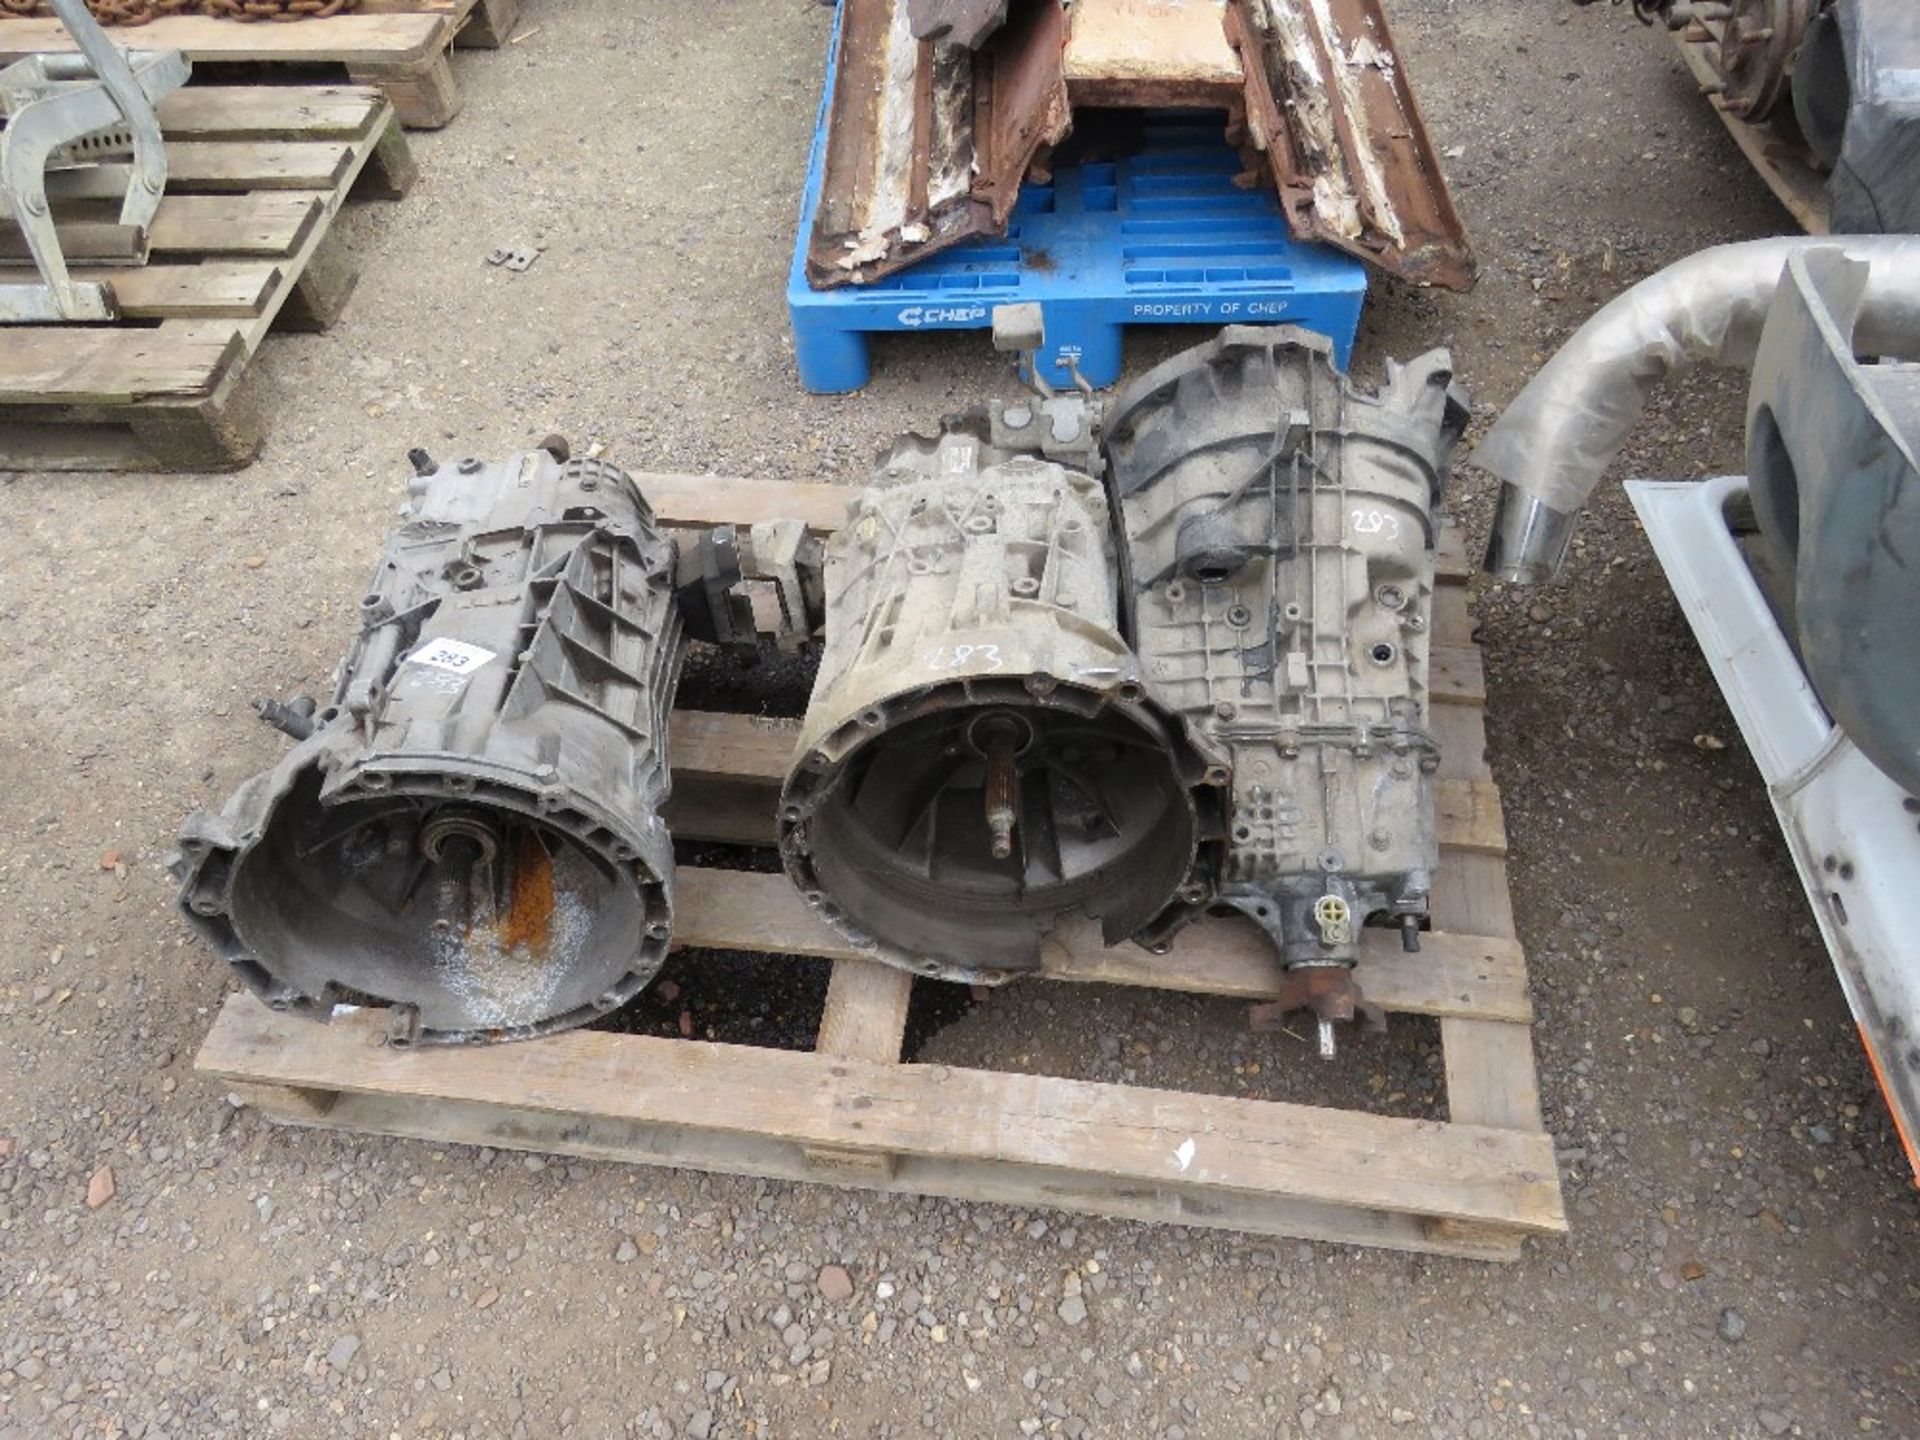 3 X GEARBOXES, BELIEVED TO BE TRANSIT TYPE. SOURCED FROM DEPOT CLOSURE. - Image 2 of 3